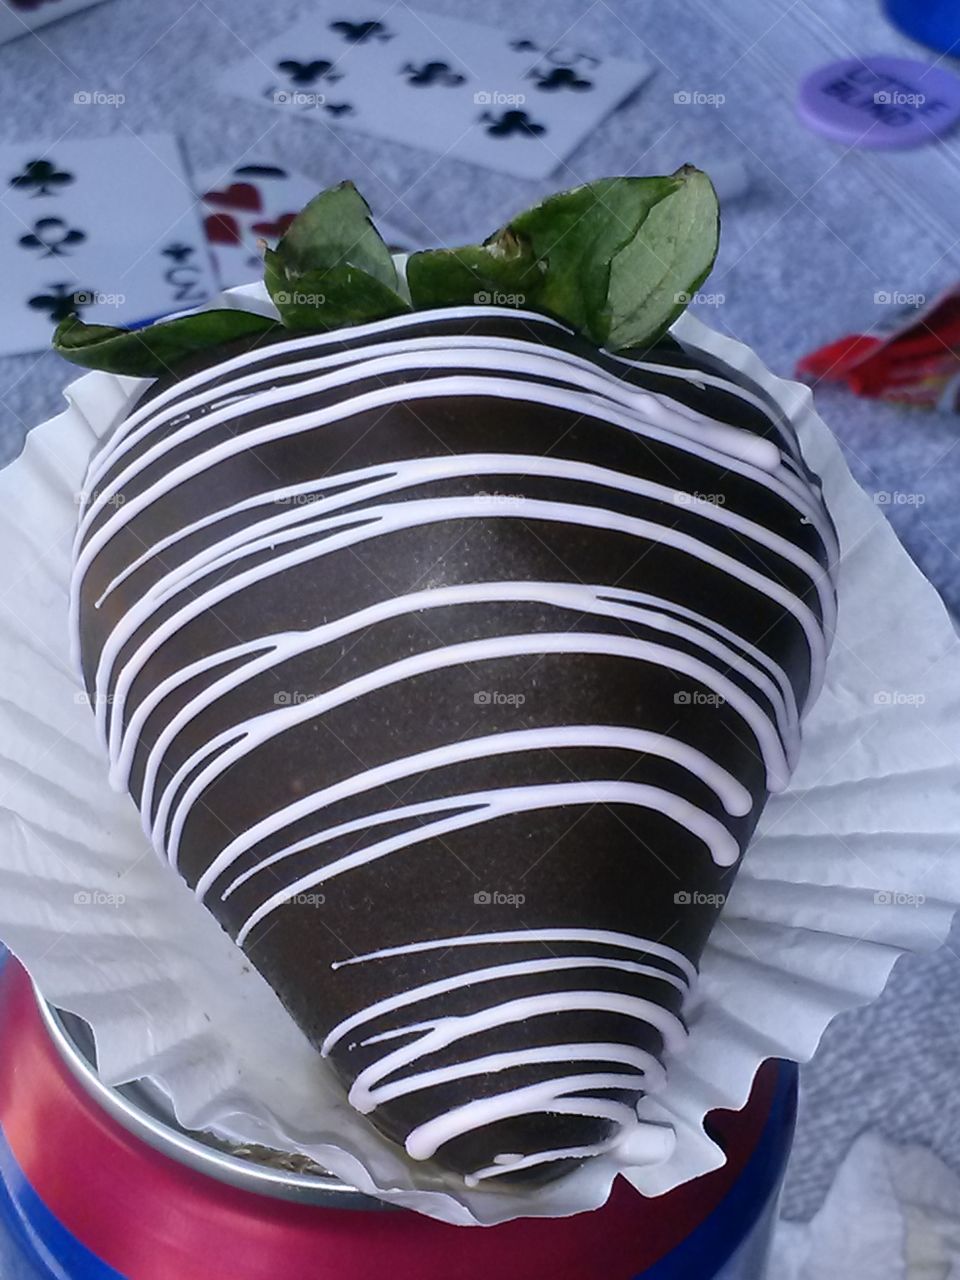 chocolate strawberry . I finally try one, and its was the bomb...!!